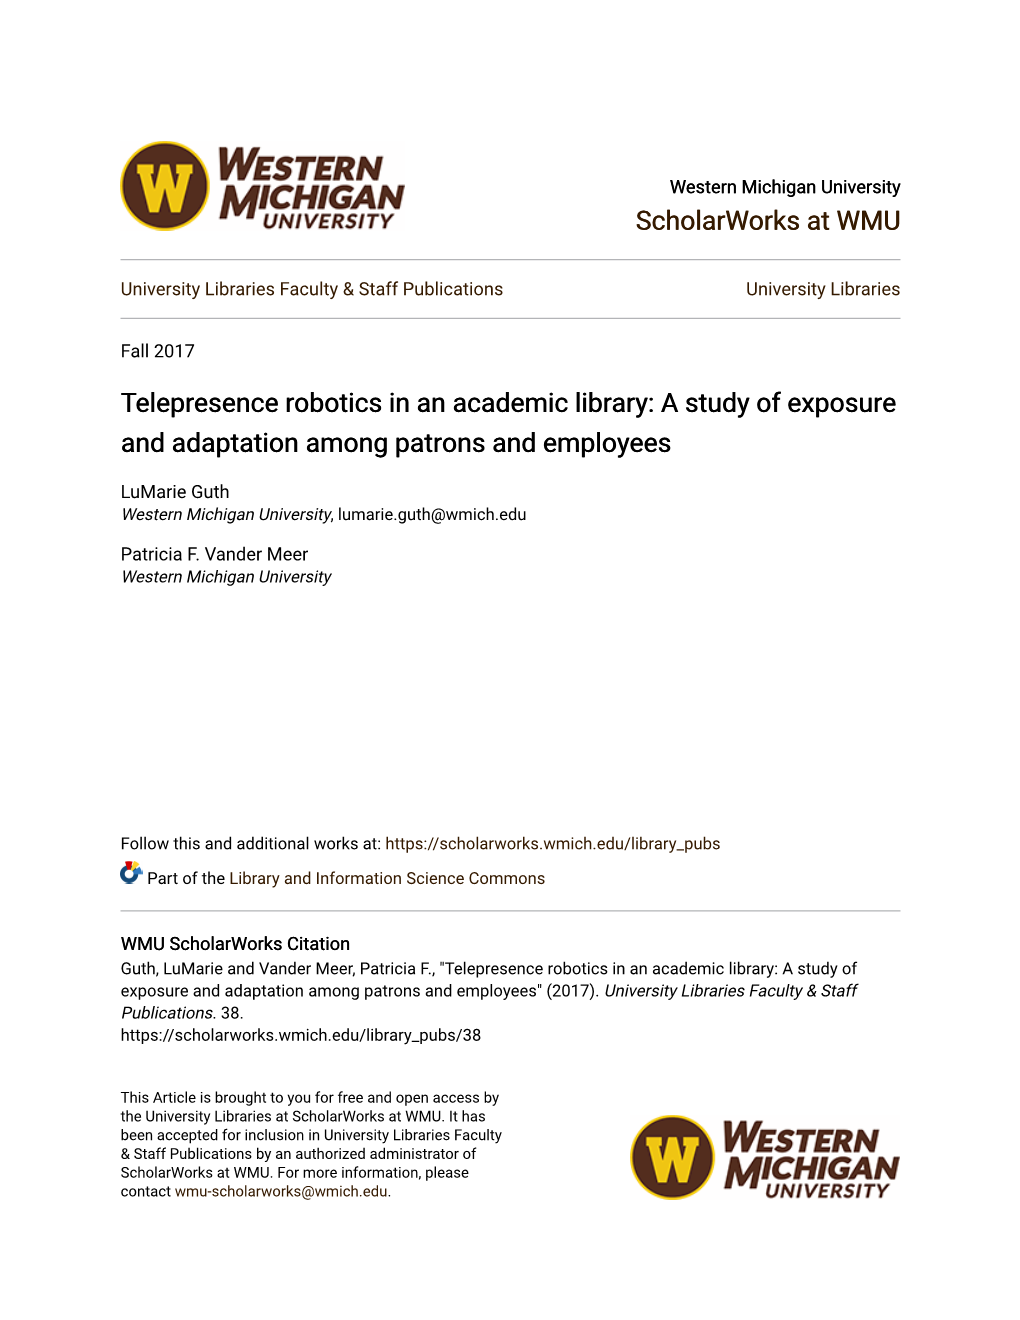 Telepresence Robotics in an Academic Library: a Study of Exposure and Adaptation Among Patrons and Employees